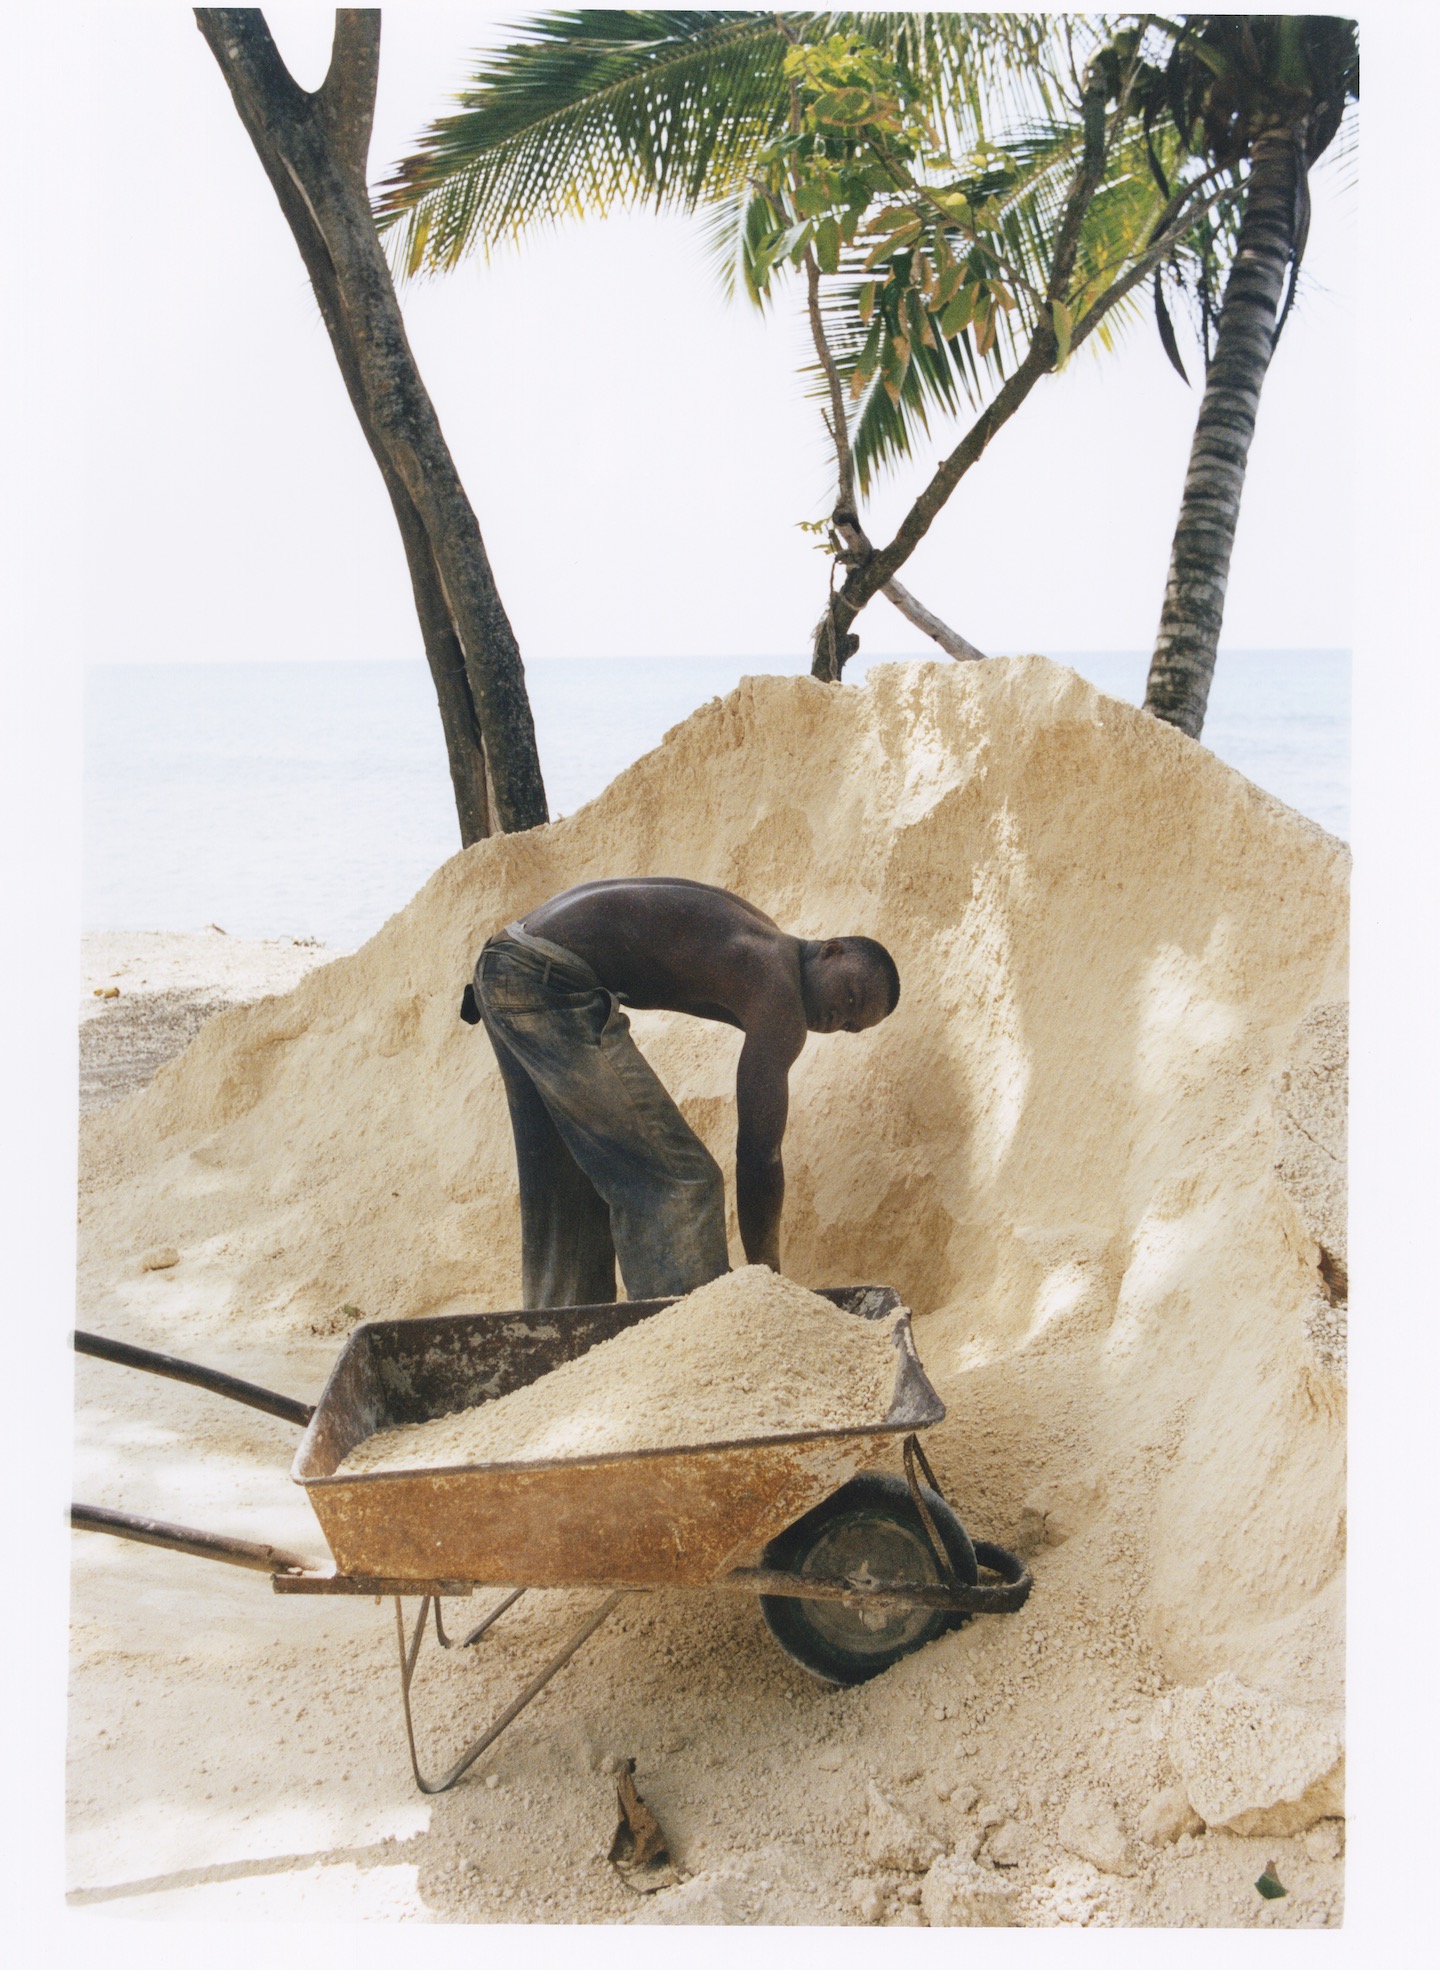 A man digs sand from a beach and fills a wheelbarrow for cement mixing.